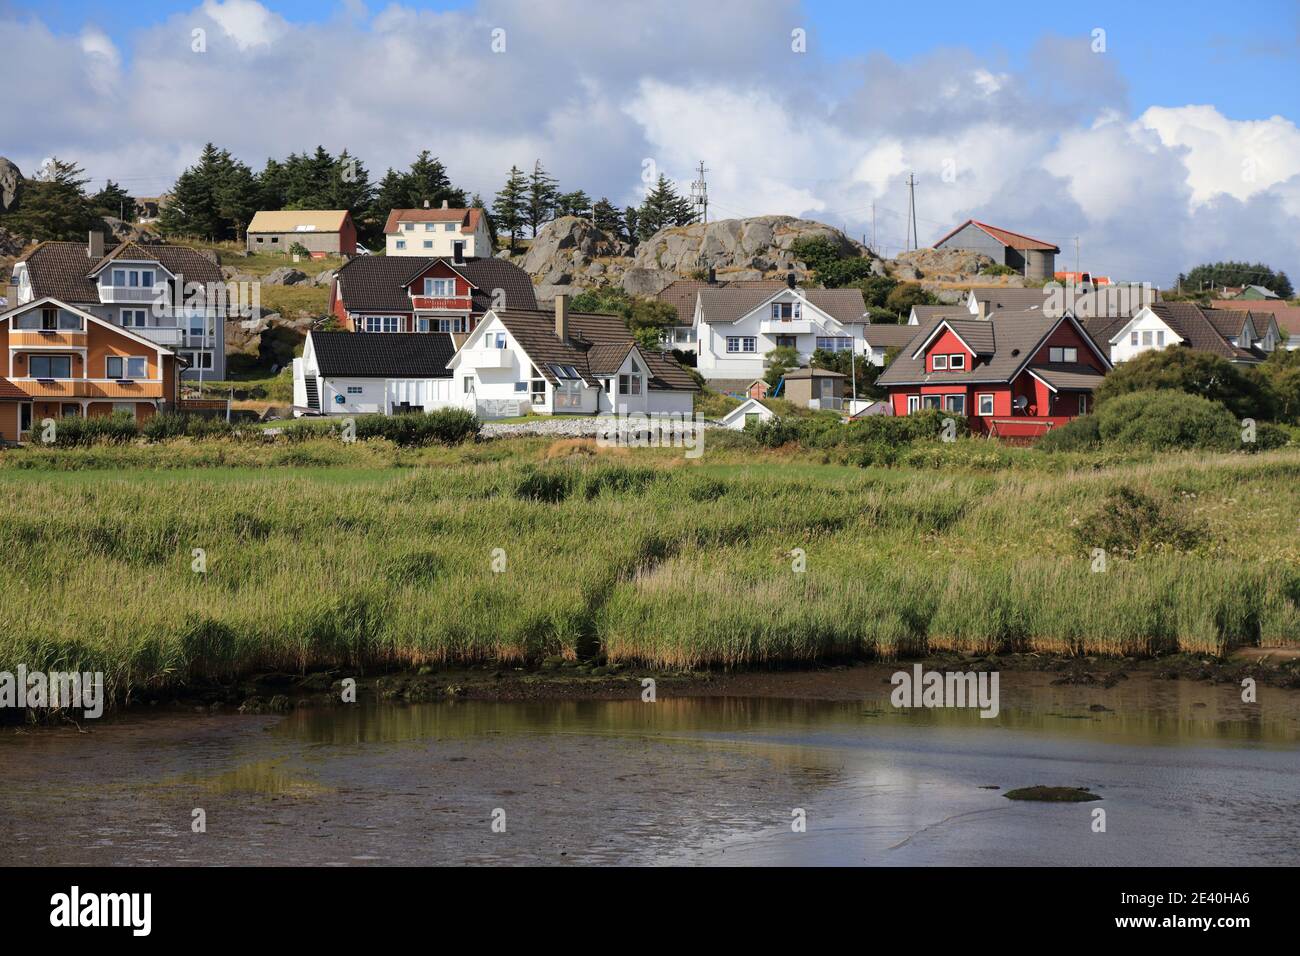 Norway colorful wooden houses of Karmoy island. Akhrehamn fishing town in Norway. Stock Photo